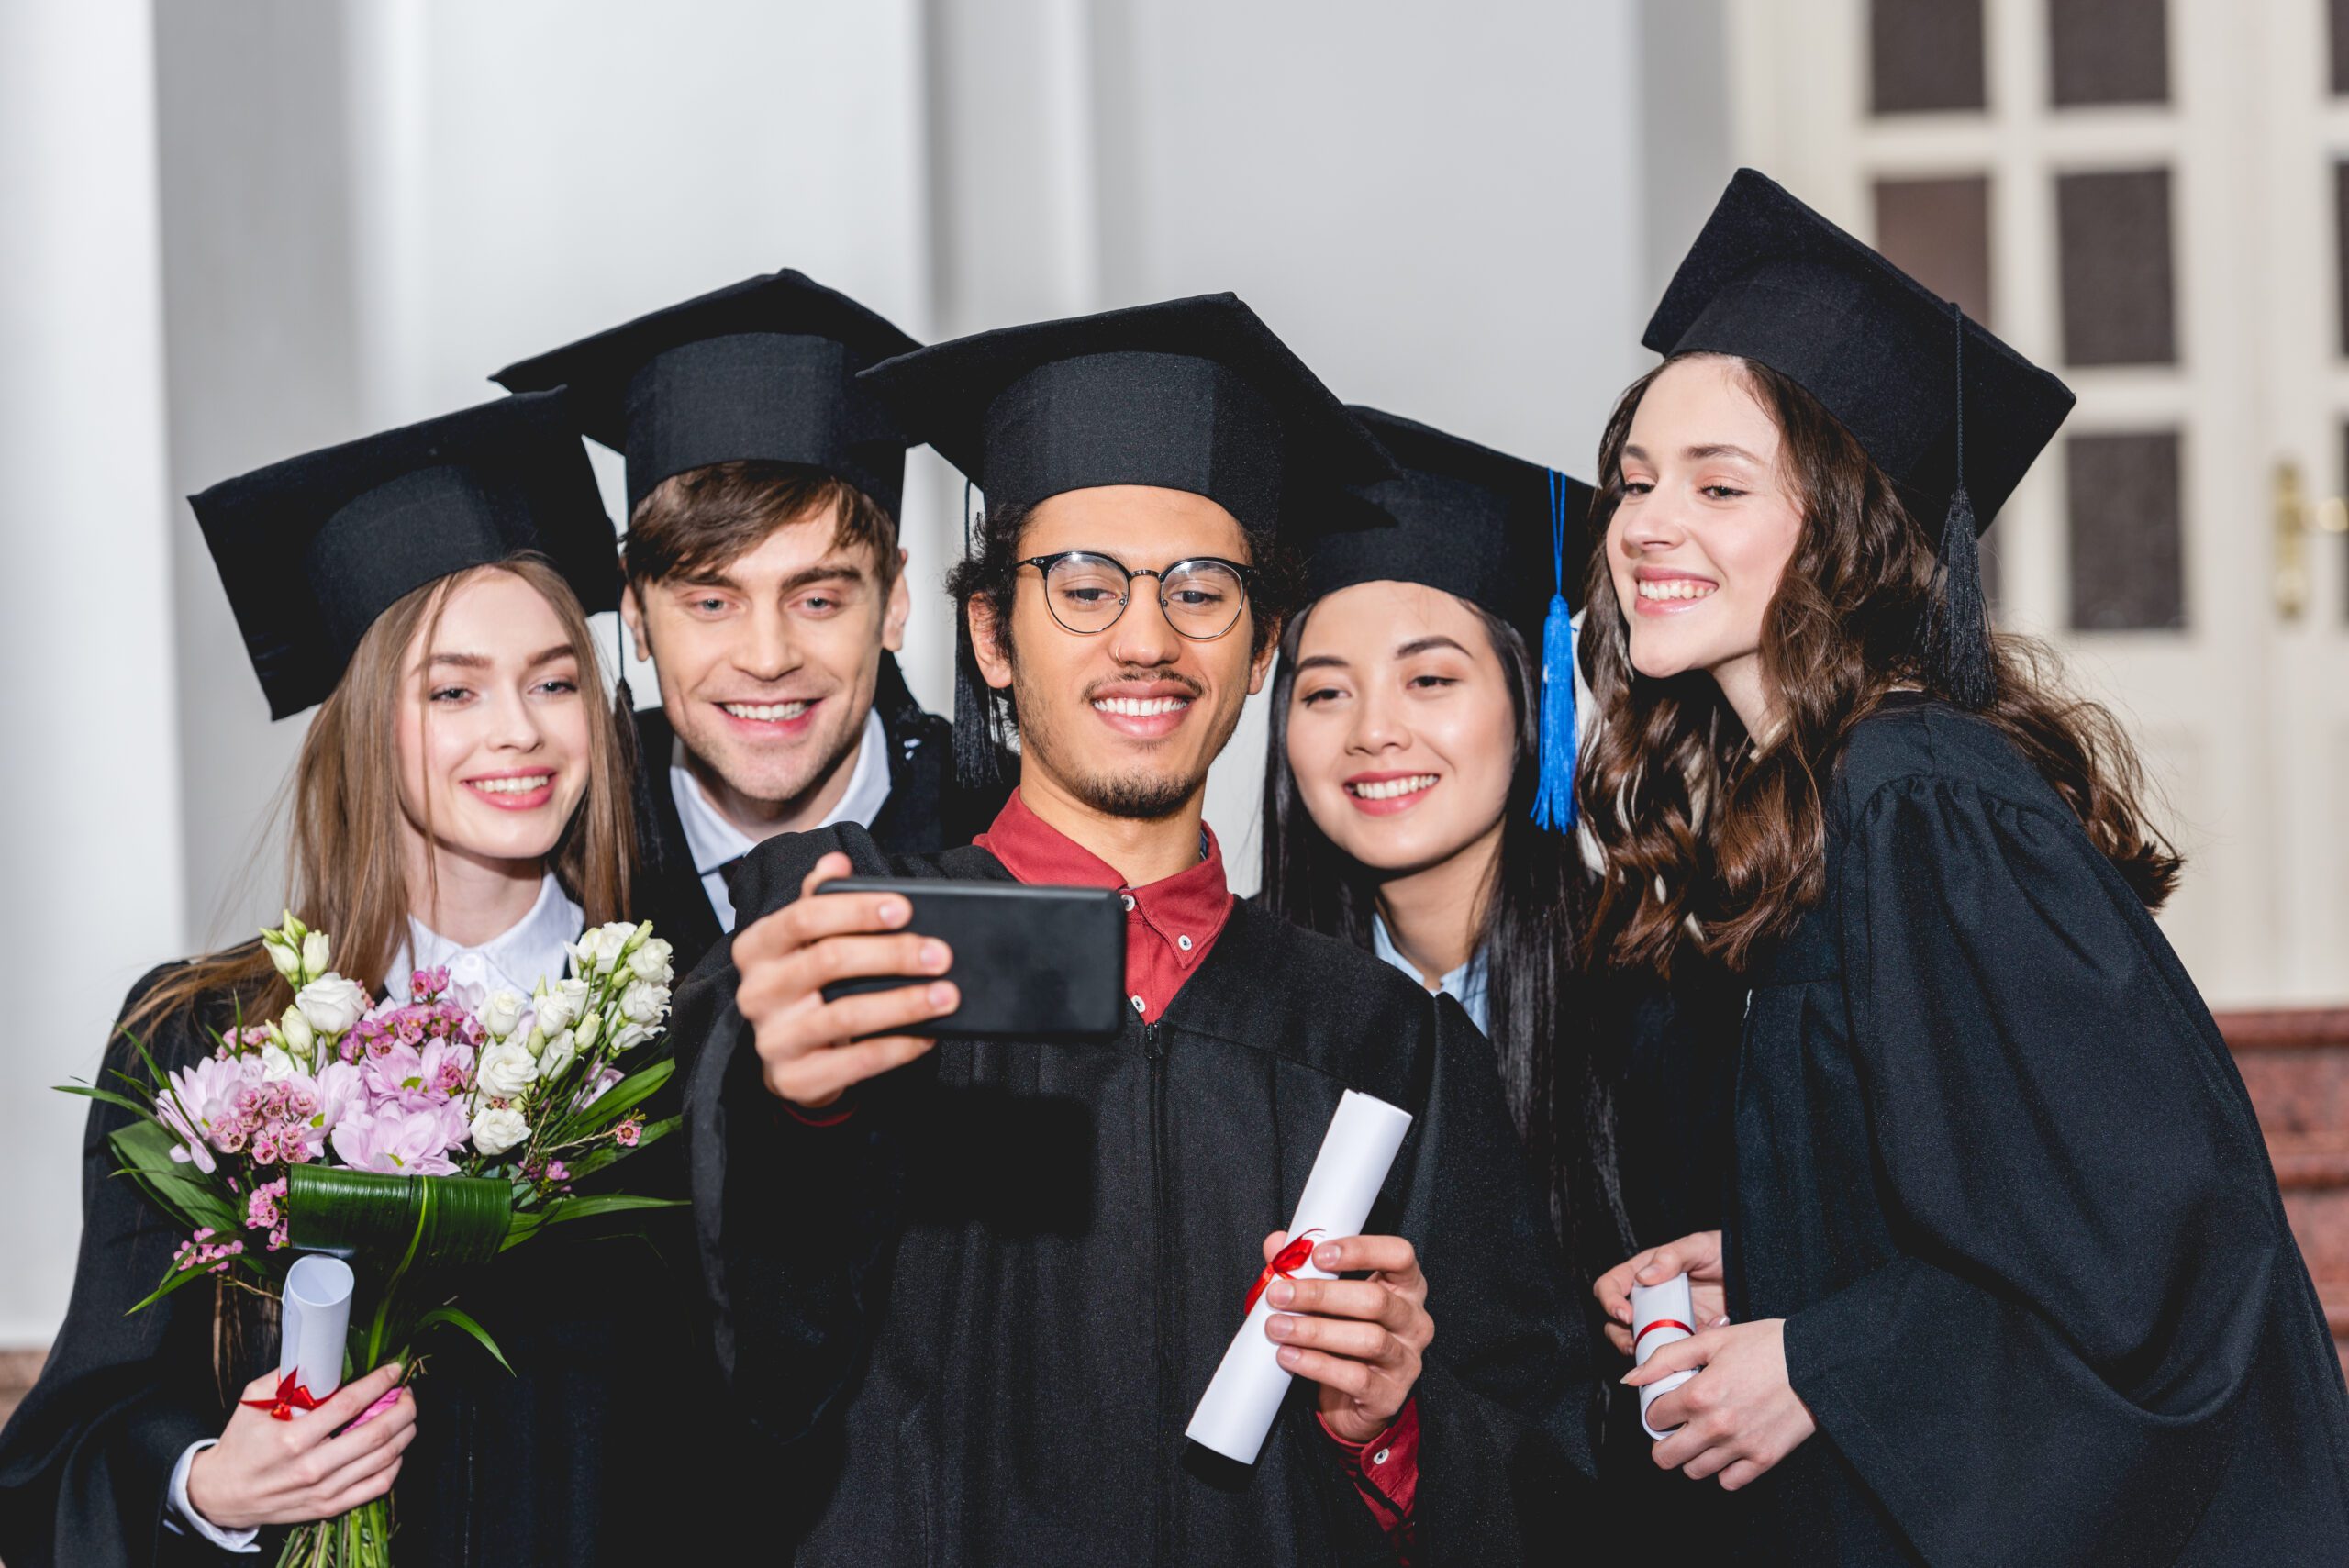 A group of graduates in cap and gown taking a selfie.